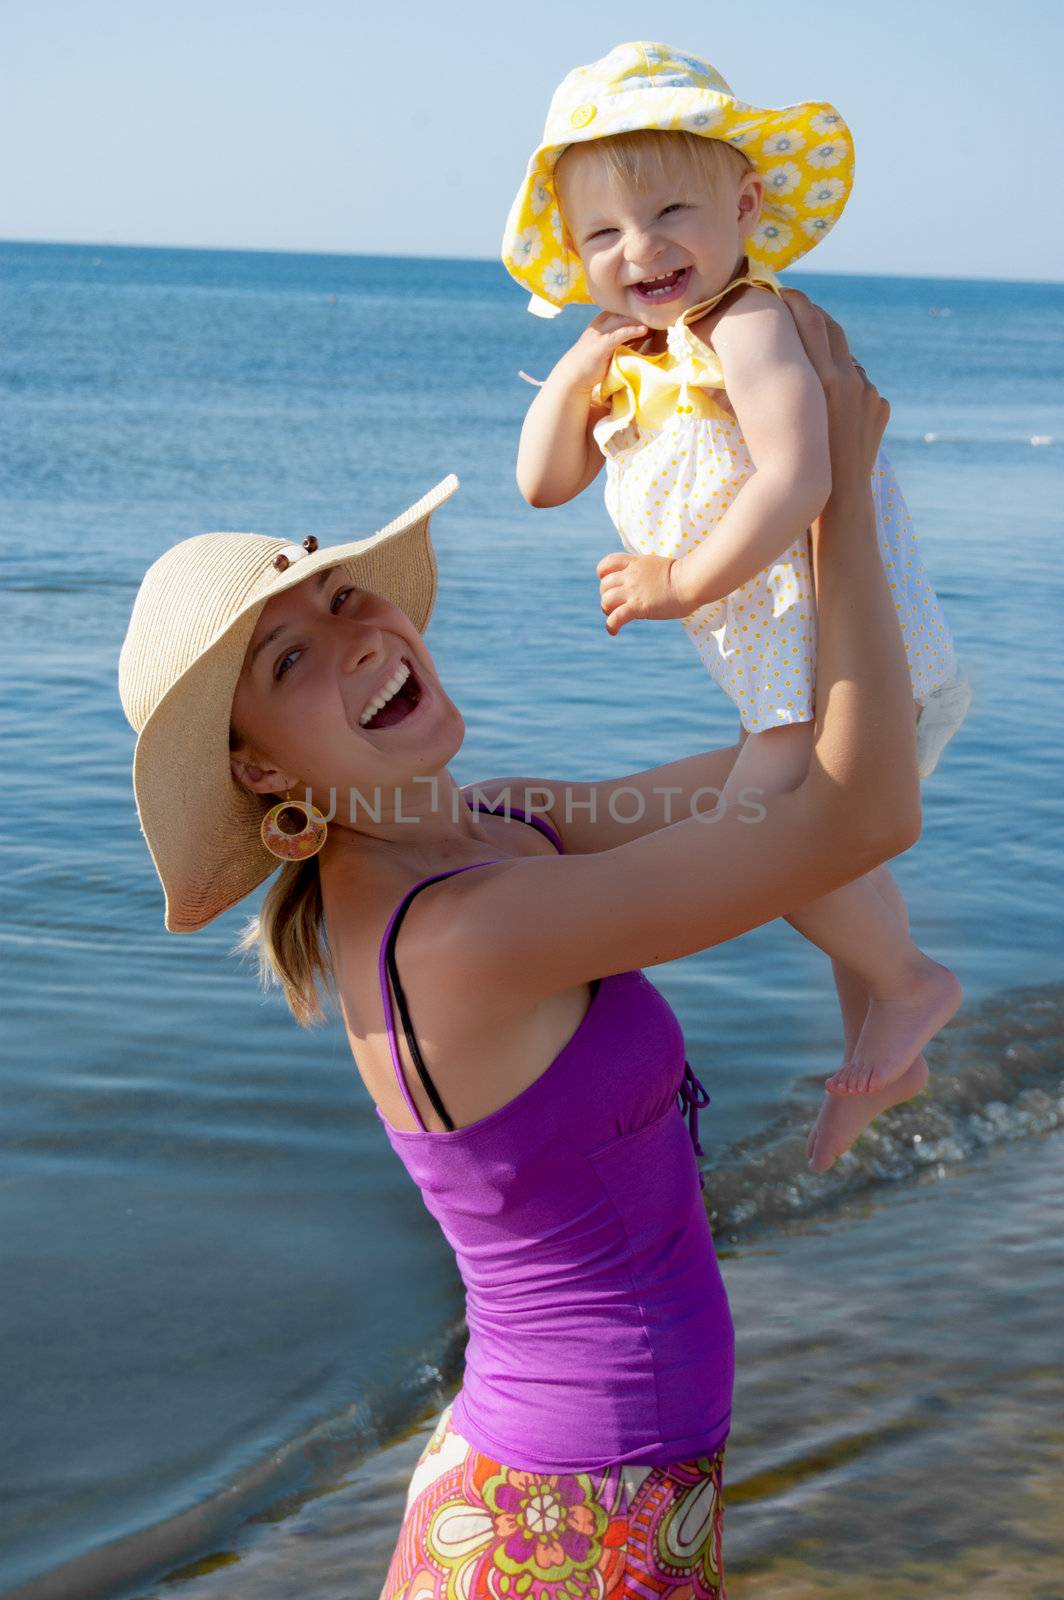 Joyful mother and daughter at beach by Angel_a